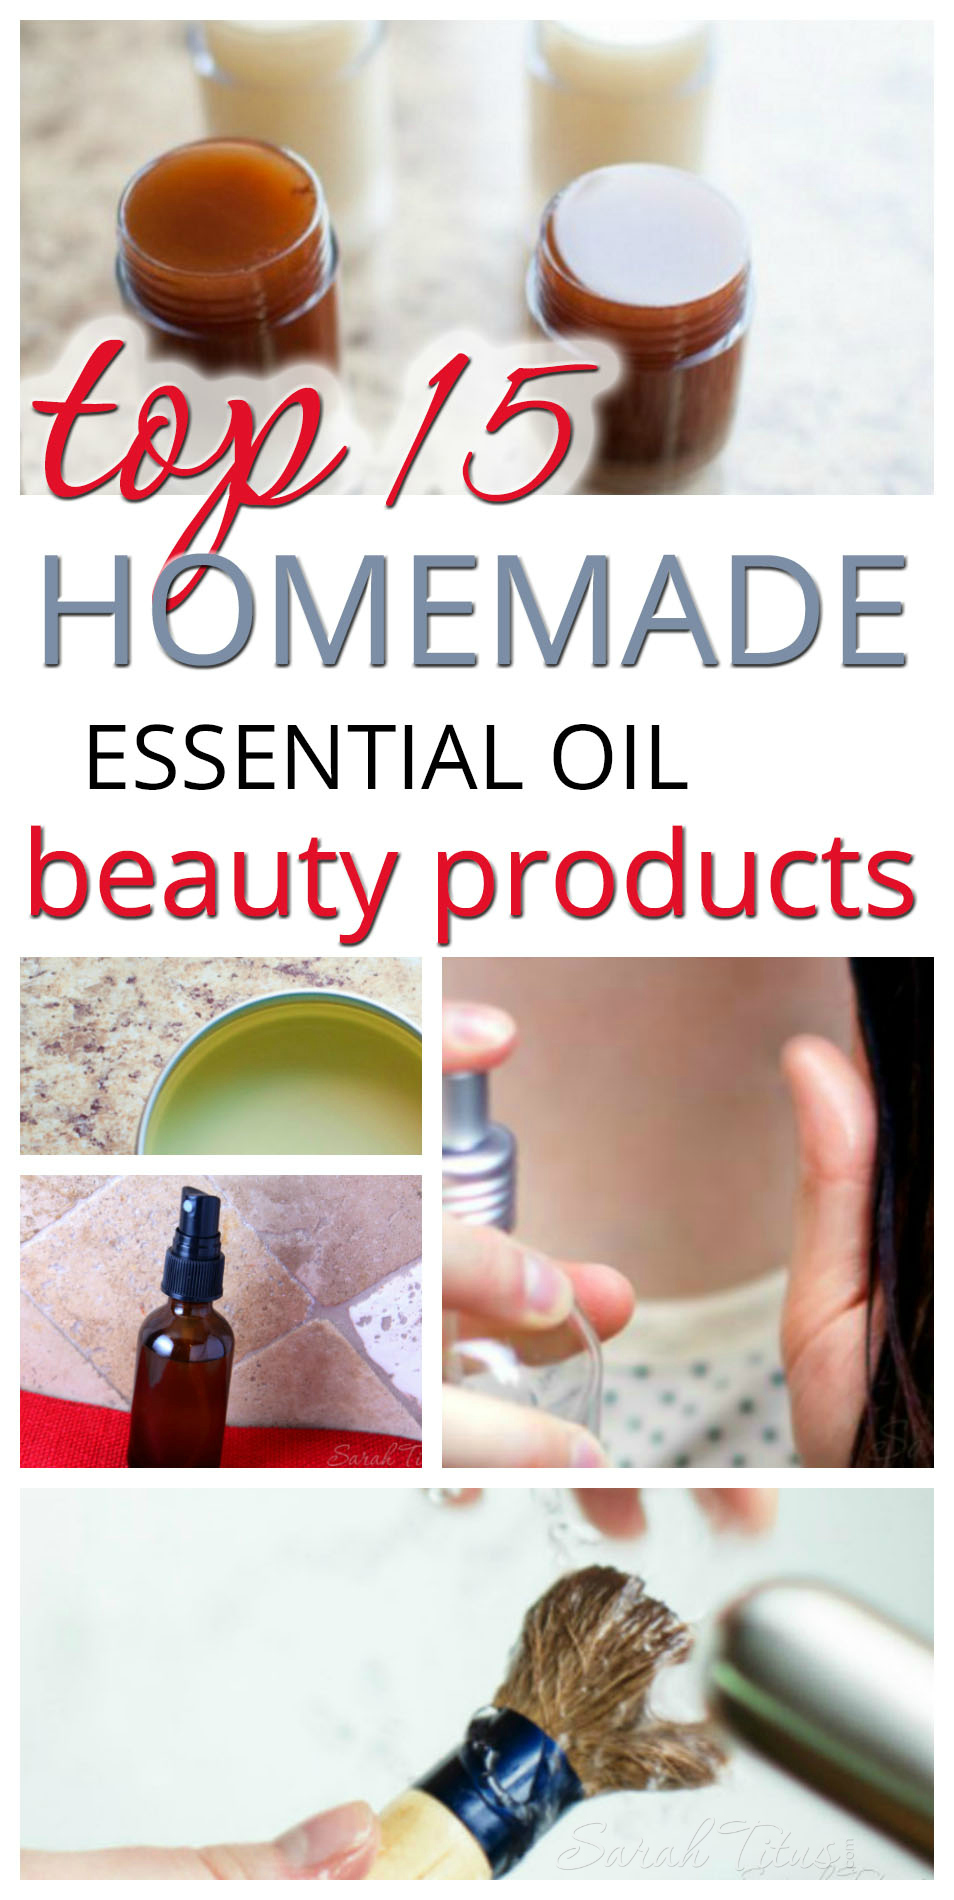 Making your own homemade essential oil beauty products literally couldn't be easier and you probably have many of the ingredients already on hand. Here's the top 15 countdown!